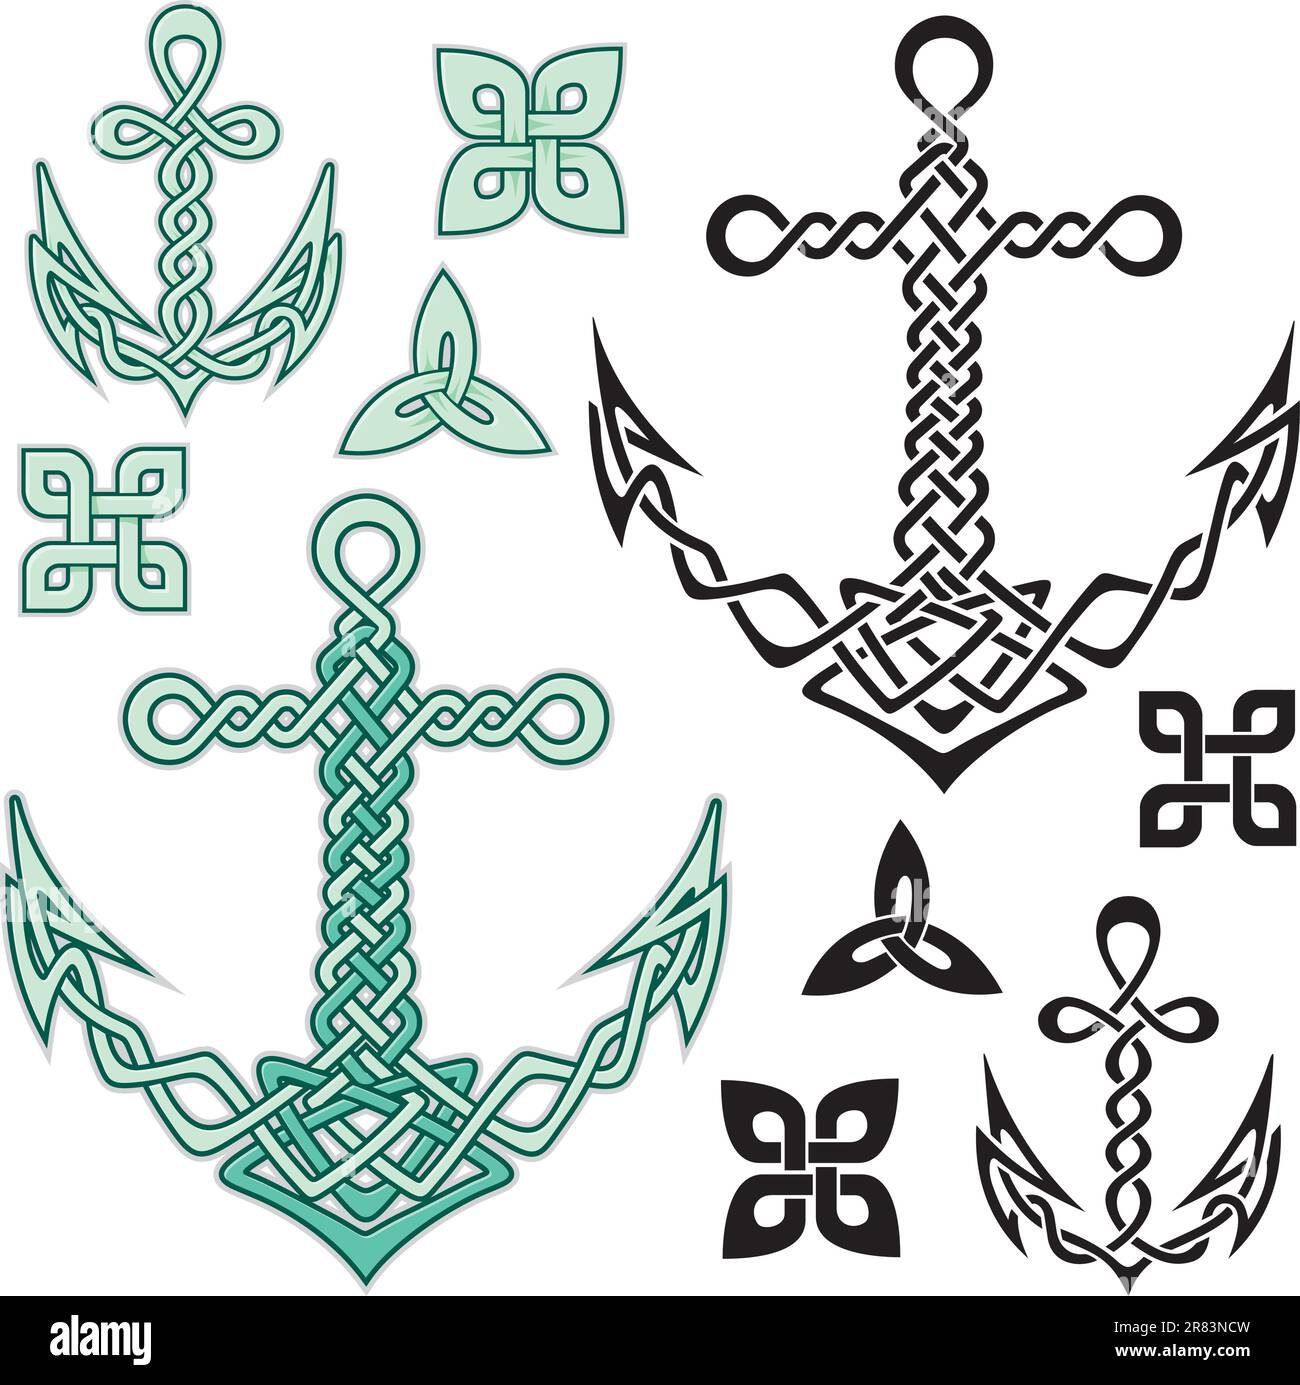 Anchor illustrations inspired from Celtic knot designs. Stock Vector